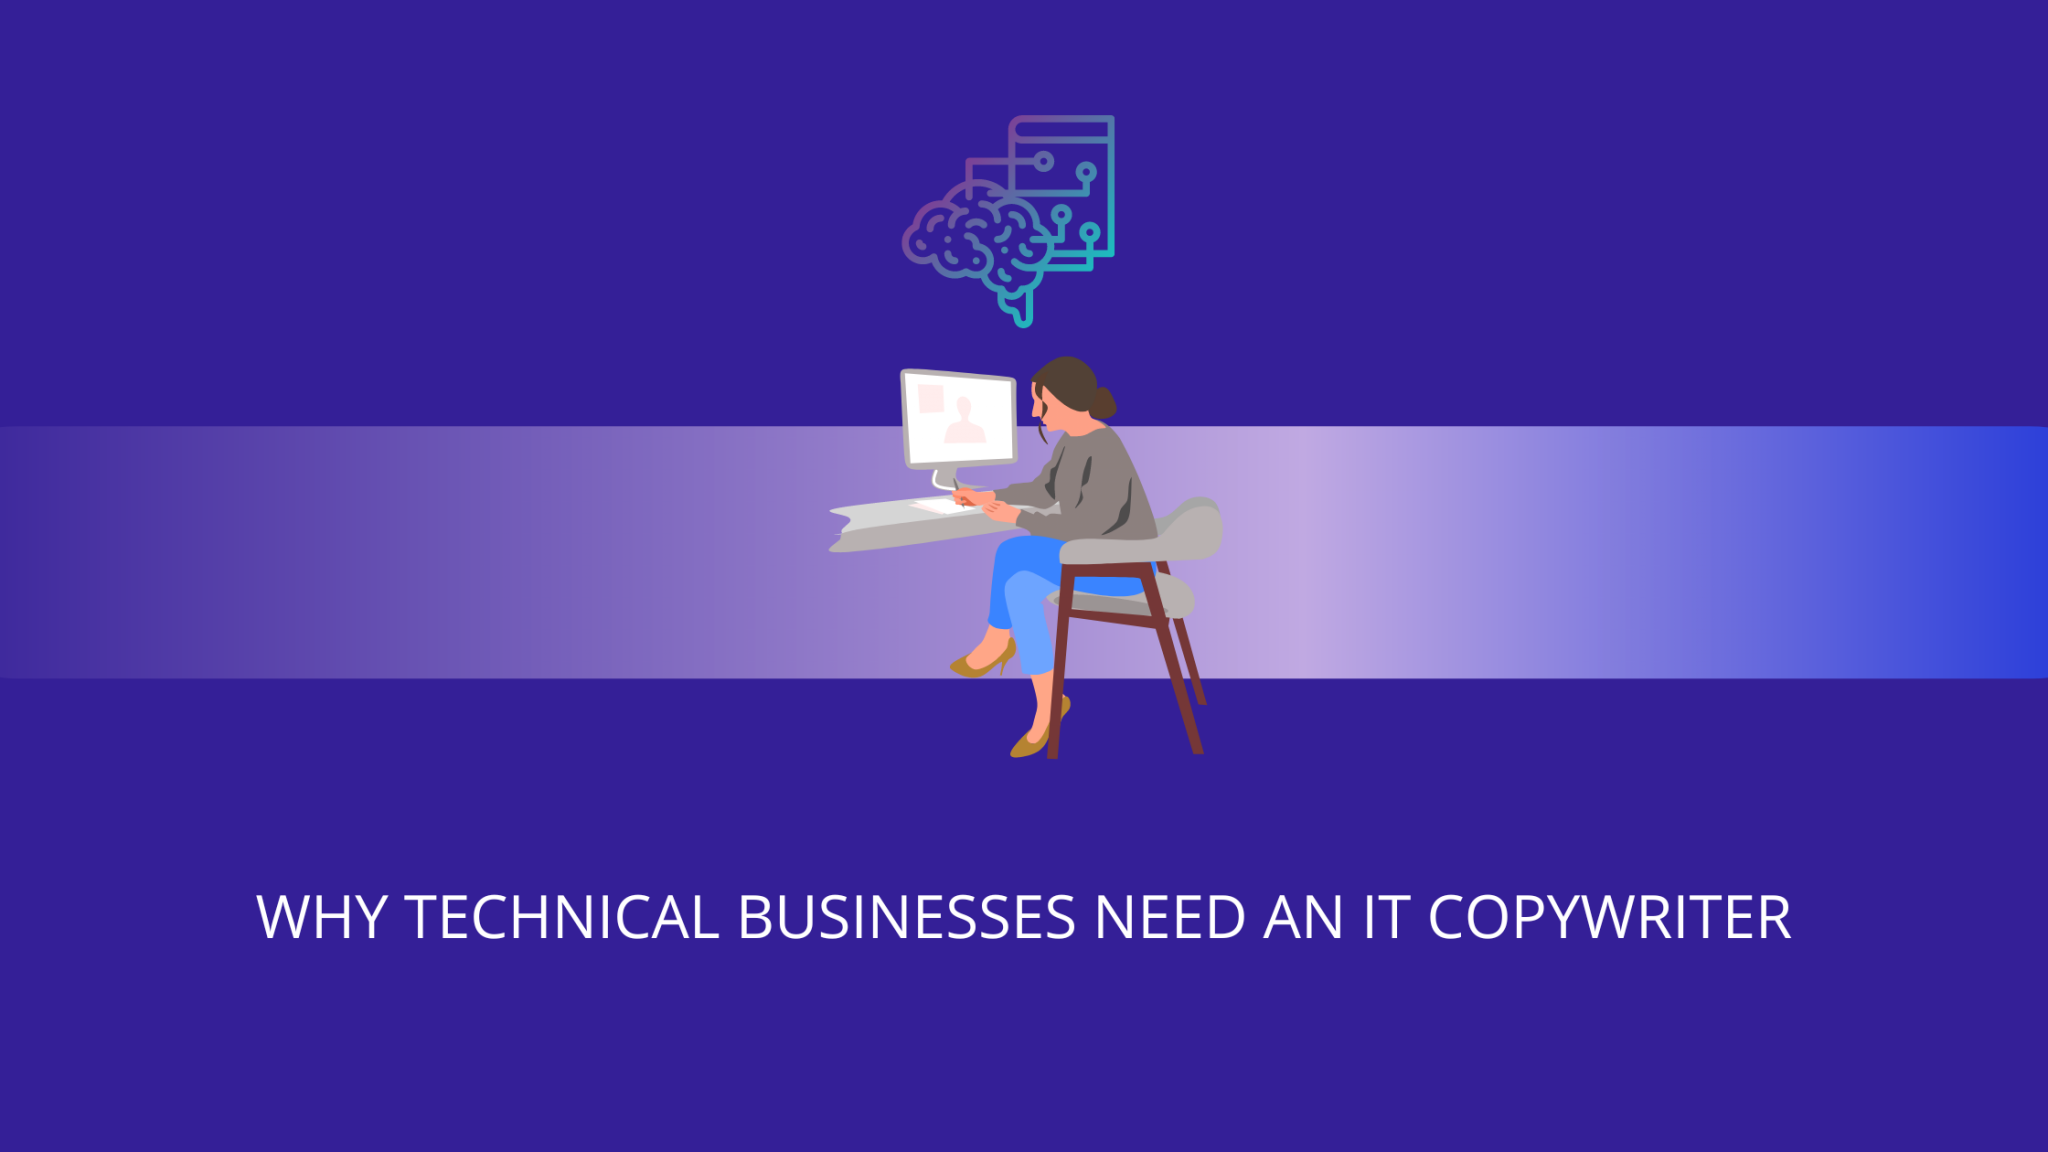 Why Technical Businesses Need an IT Copywriter